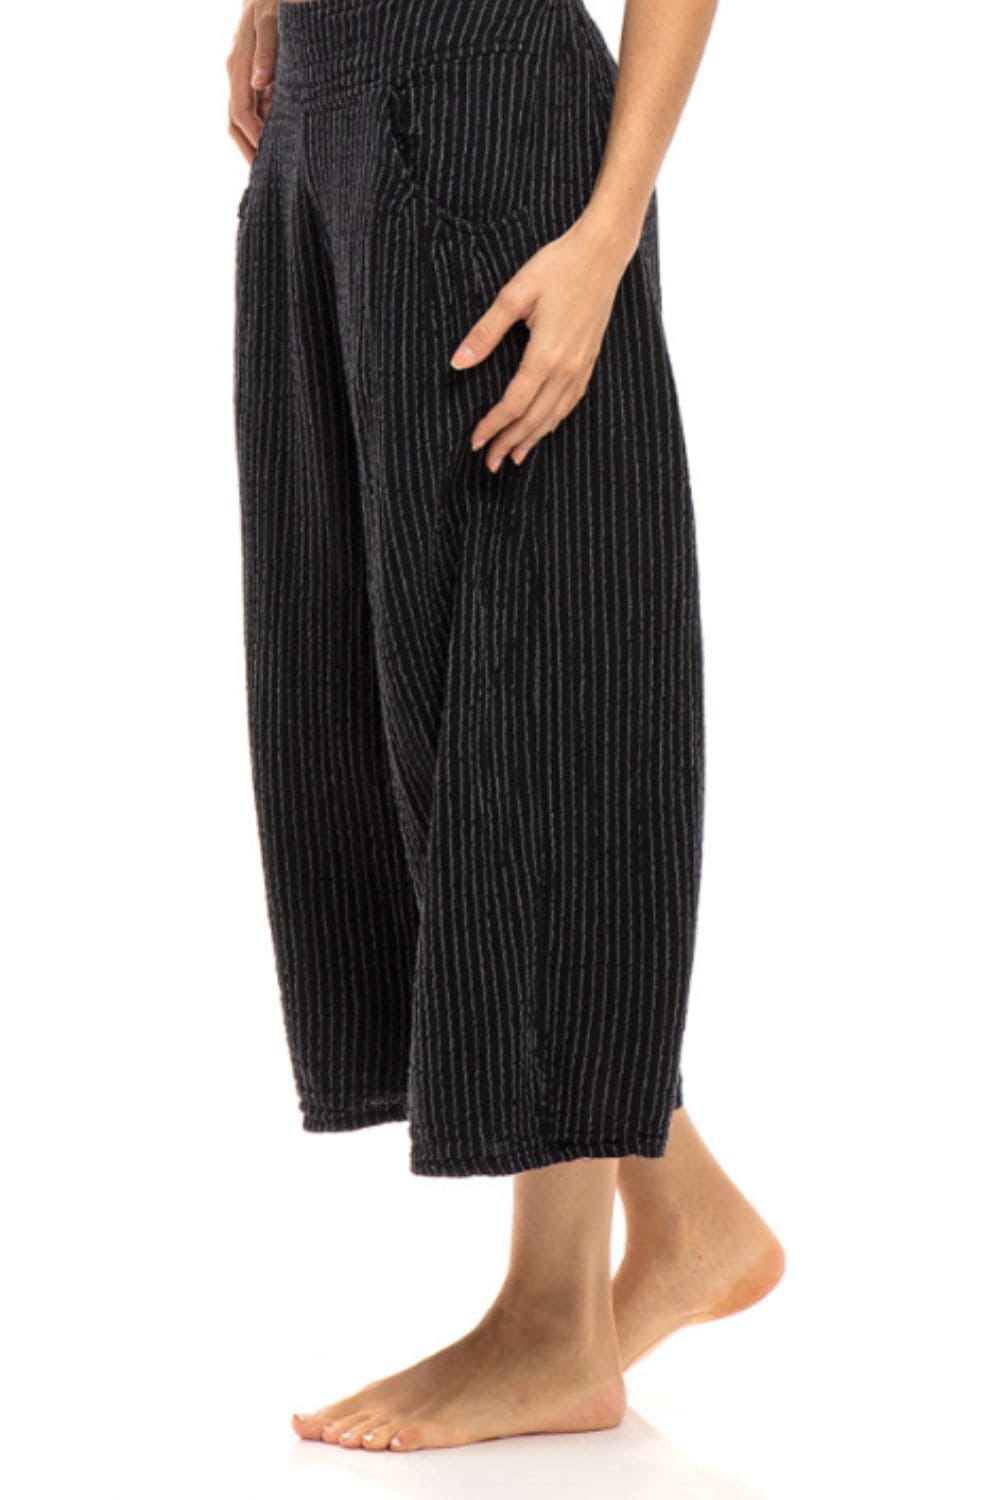 Women's Black cotton crop pant with pinstripes and two front pockets,